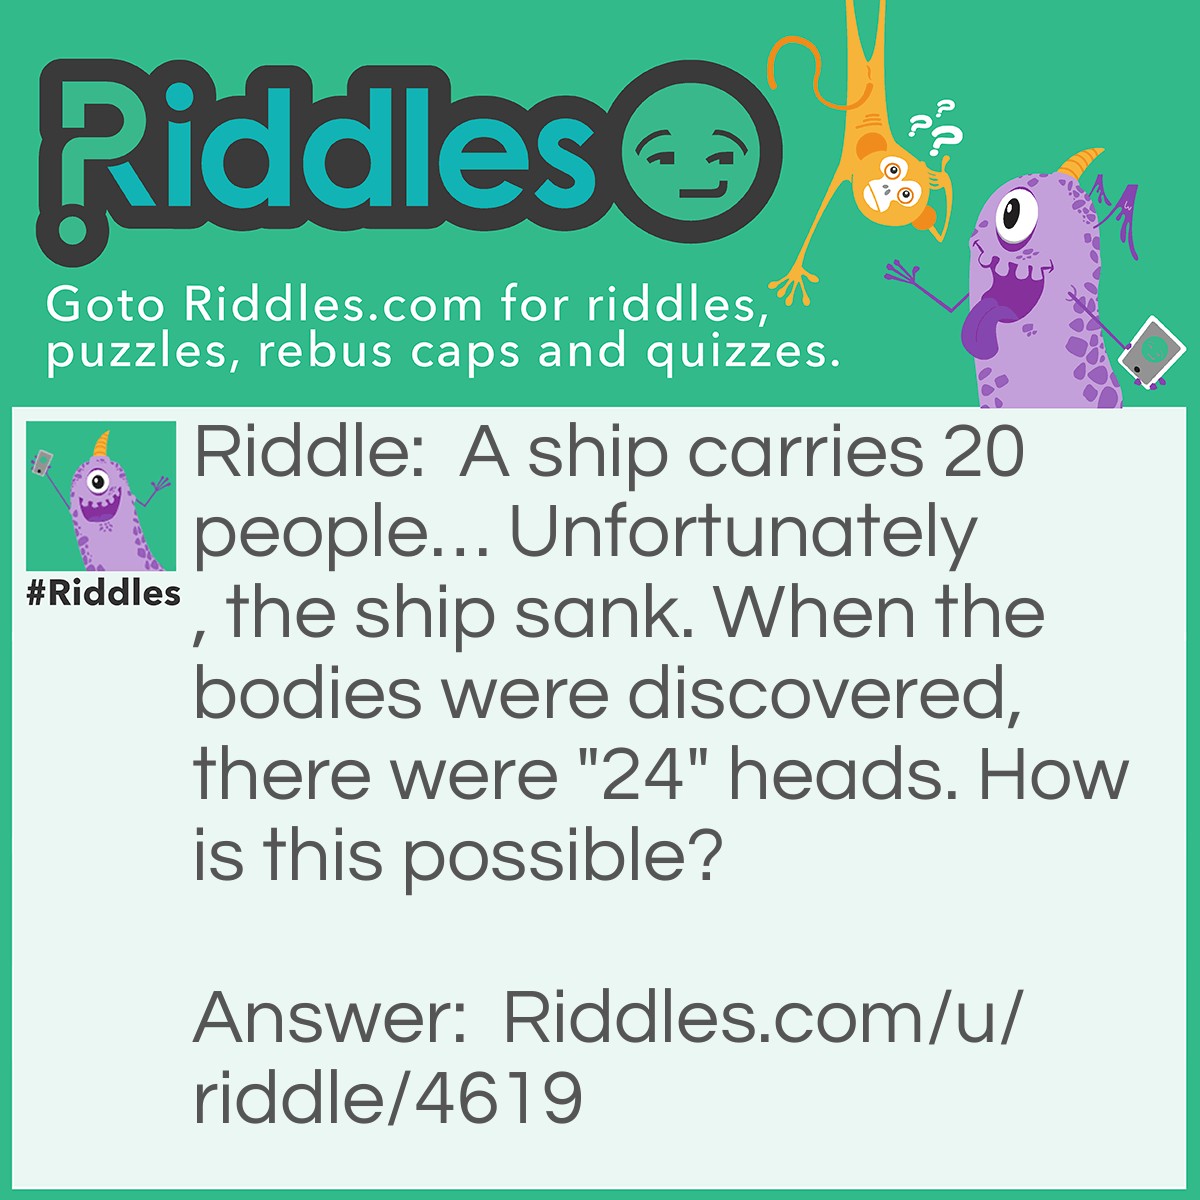 Riddle: A ship carries 20 people... Unfortunately, the ship sank. When the bodies were discovered, there were "24" heads. How is this possible? Answer: There were 20 FOREHEADS…